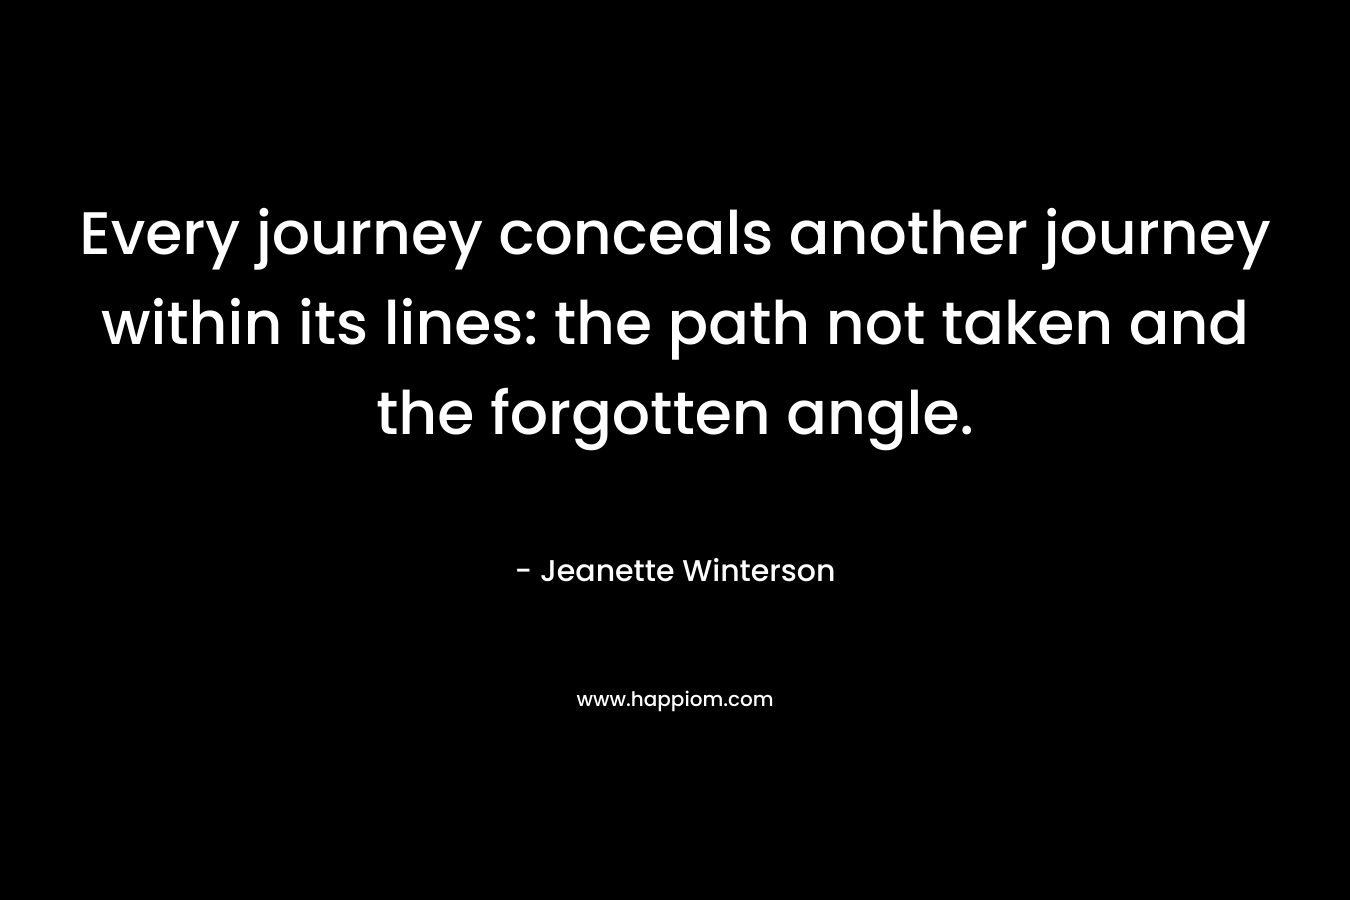 Every journey conceals another journey within its lines: the path not taken and the forgotten angle. – Jeanette Winterson